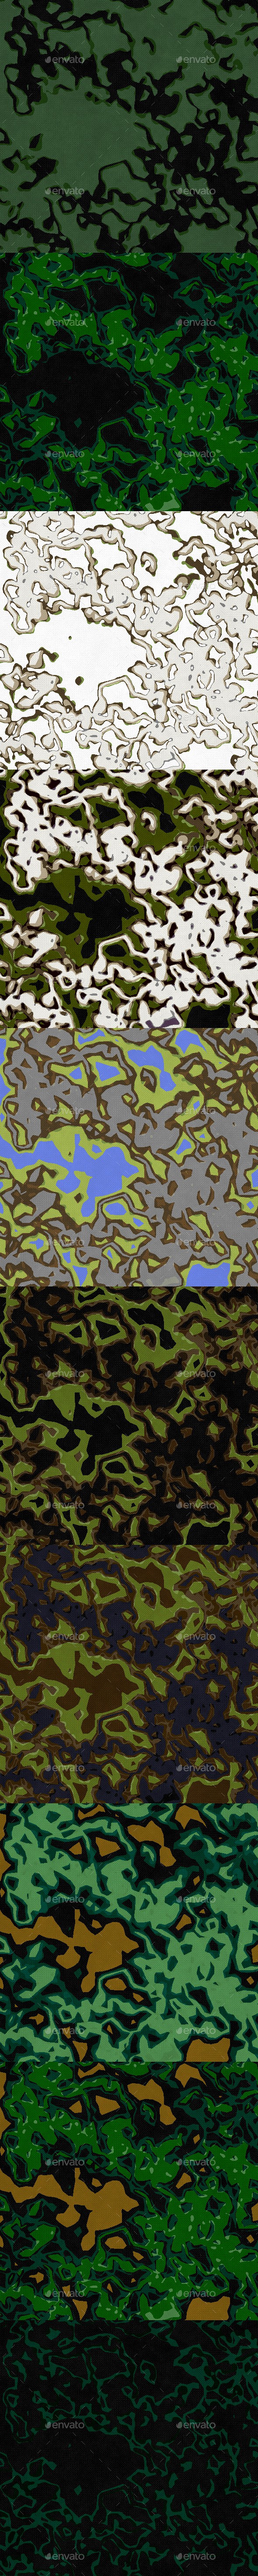 Stylized Camouflage Textures